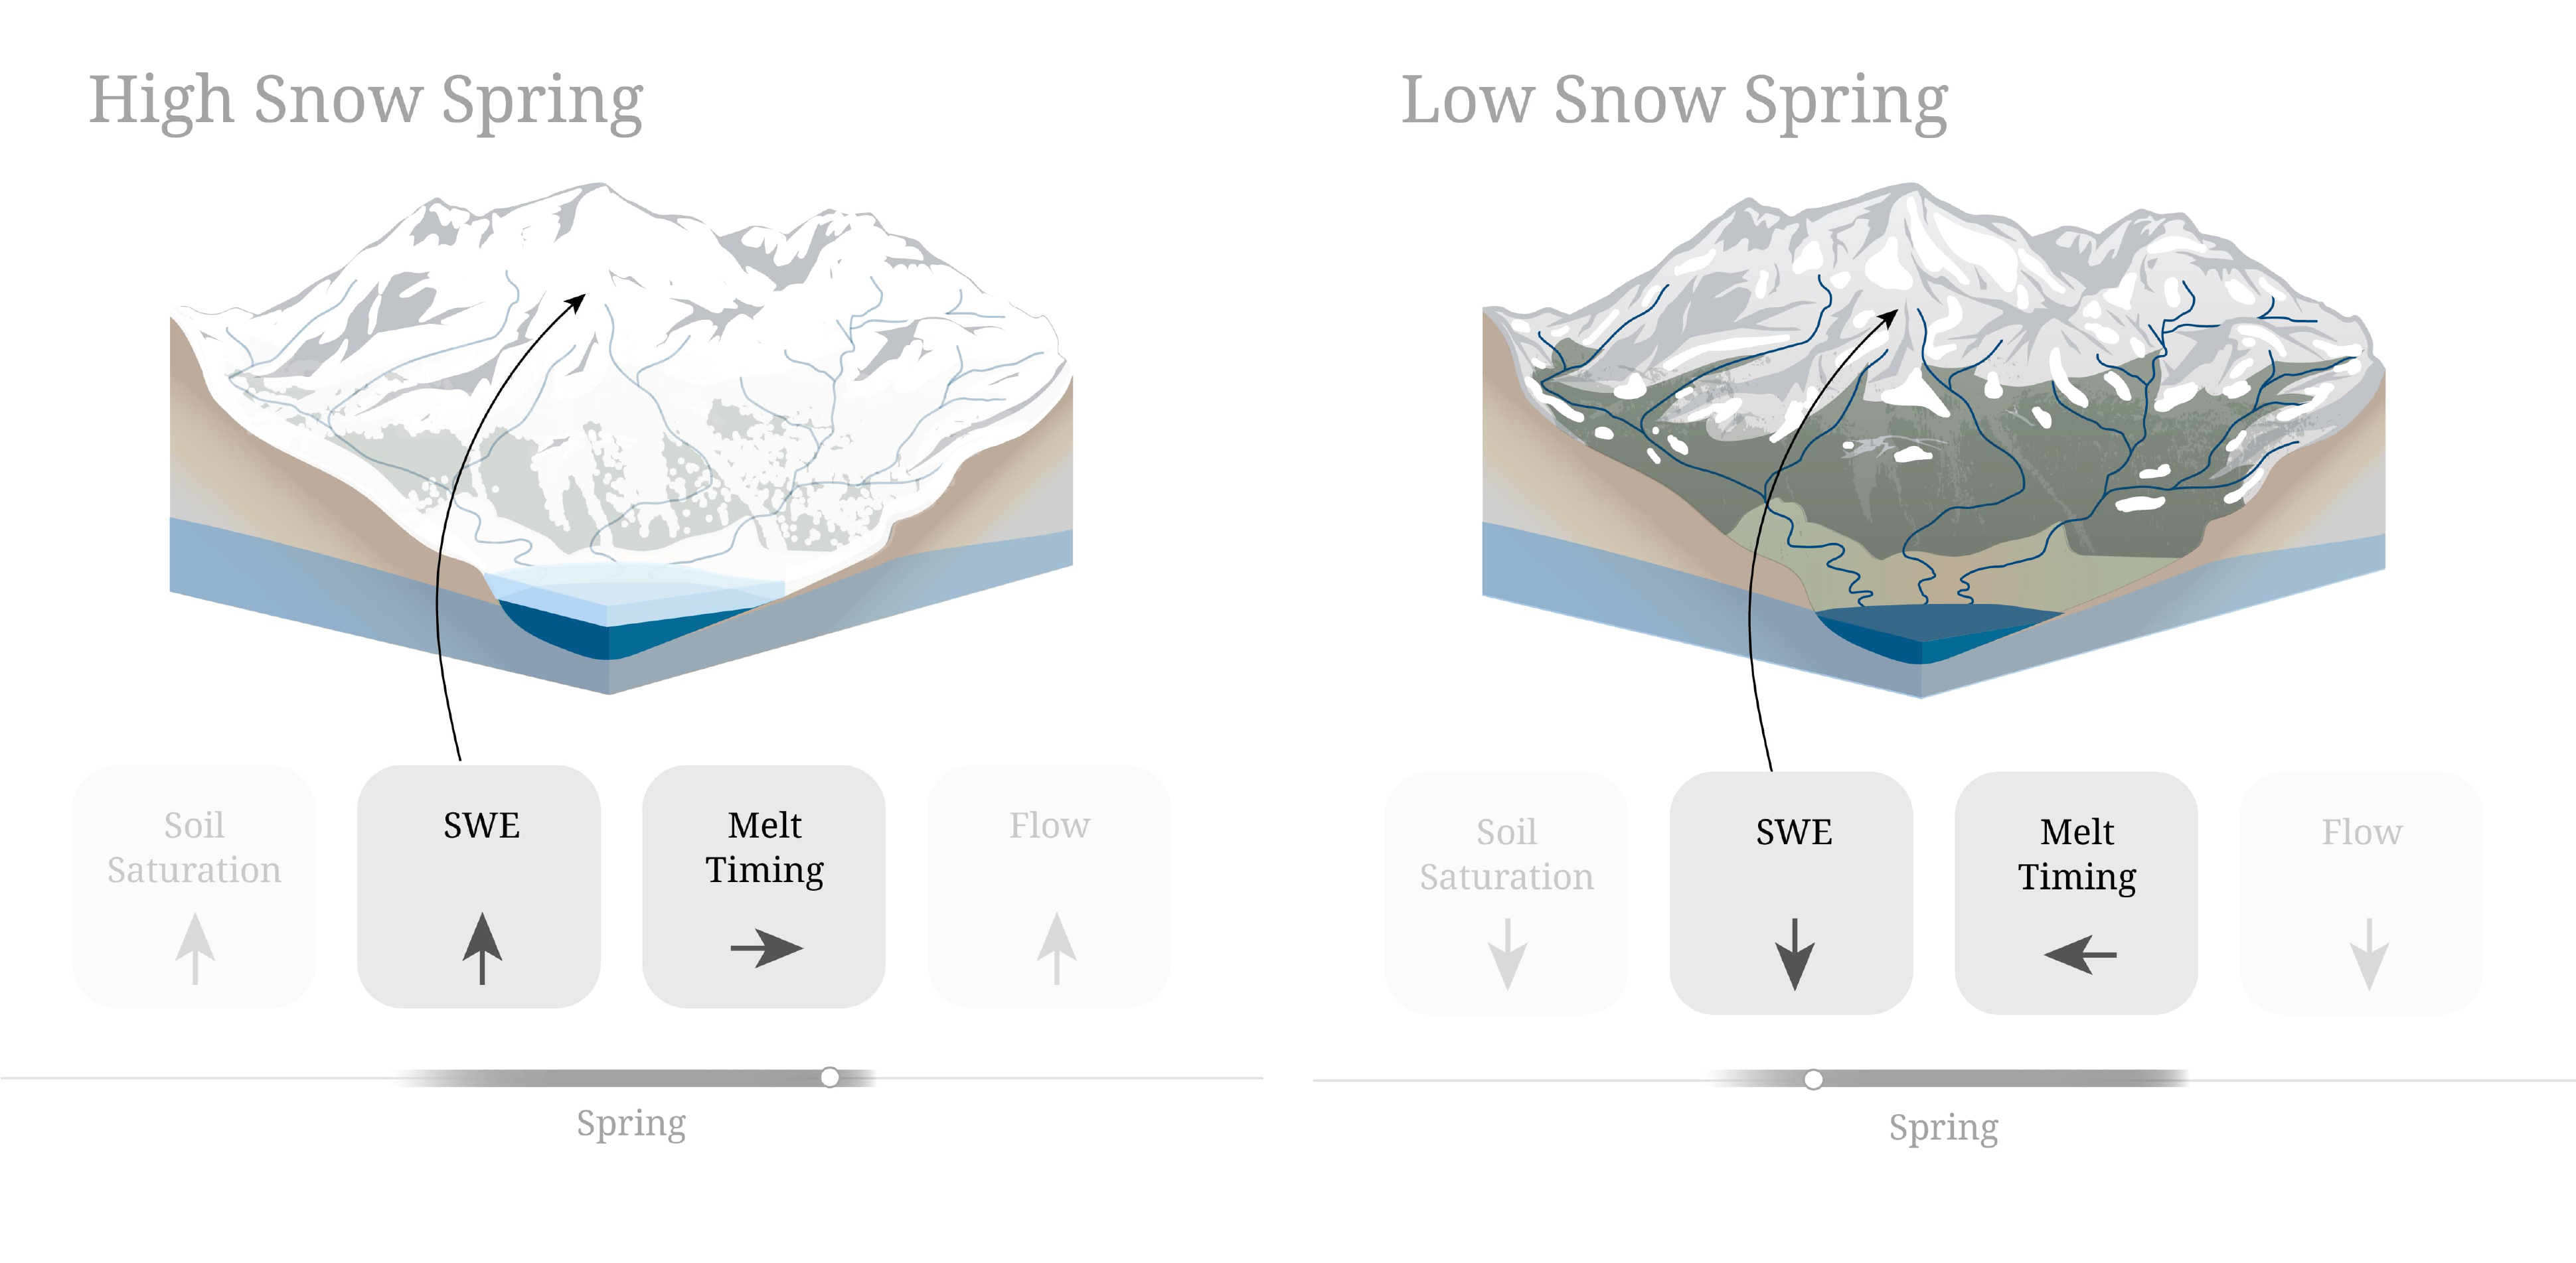 A mountain scene depicted in the Spring months during a high snow year and a low snow year. When snow-water equivalent (SWE) is higher, the timing of snowmelt occurs later in the year. When SWE in low, timing may be earlier.